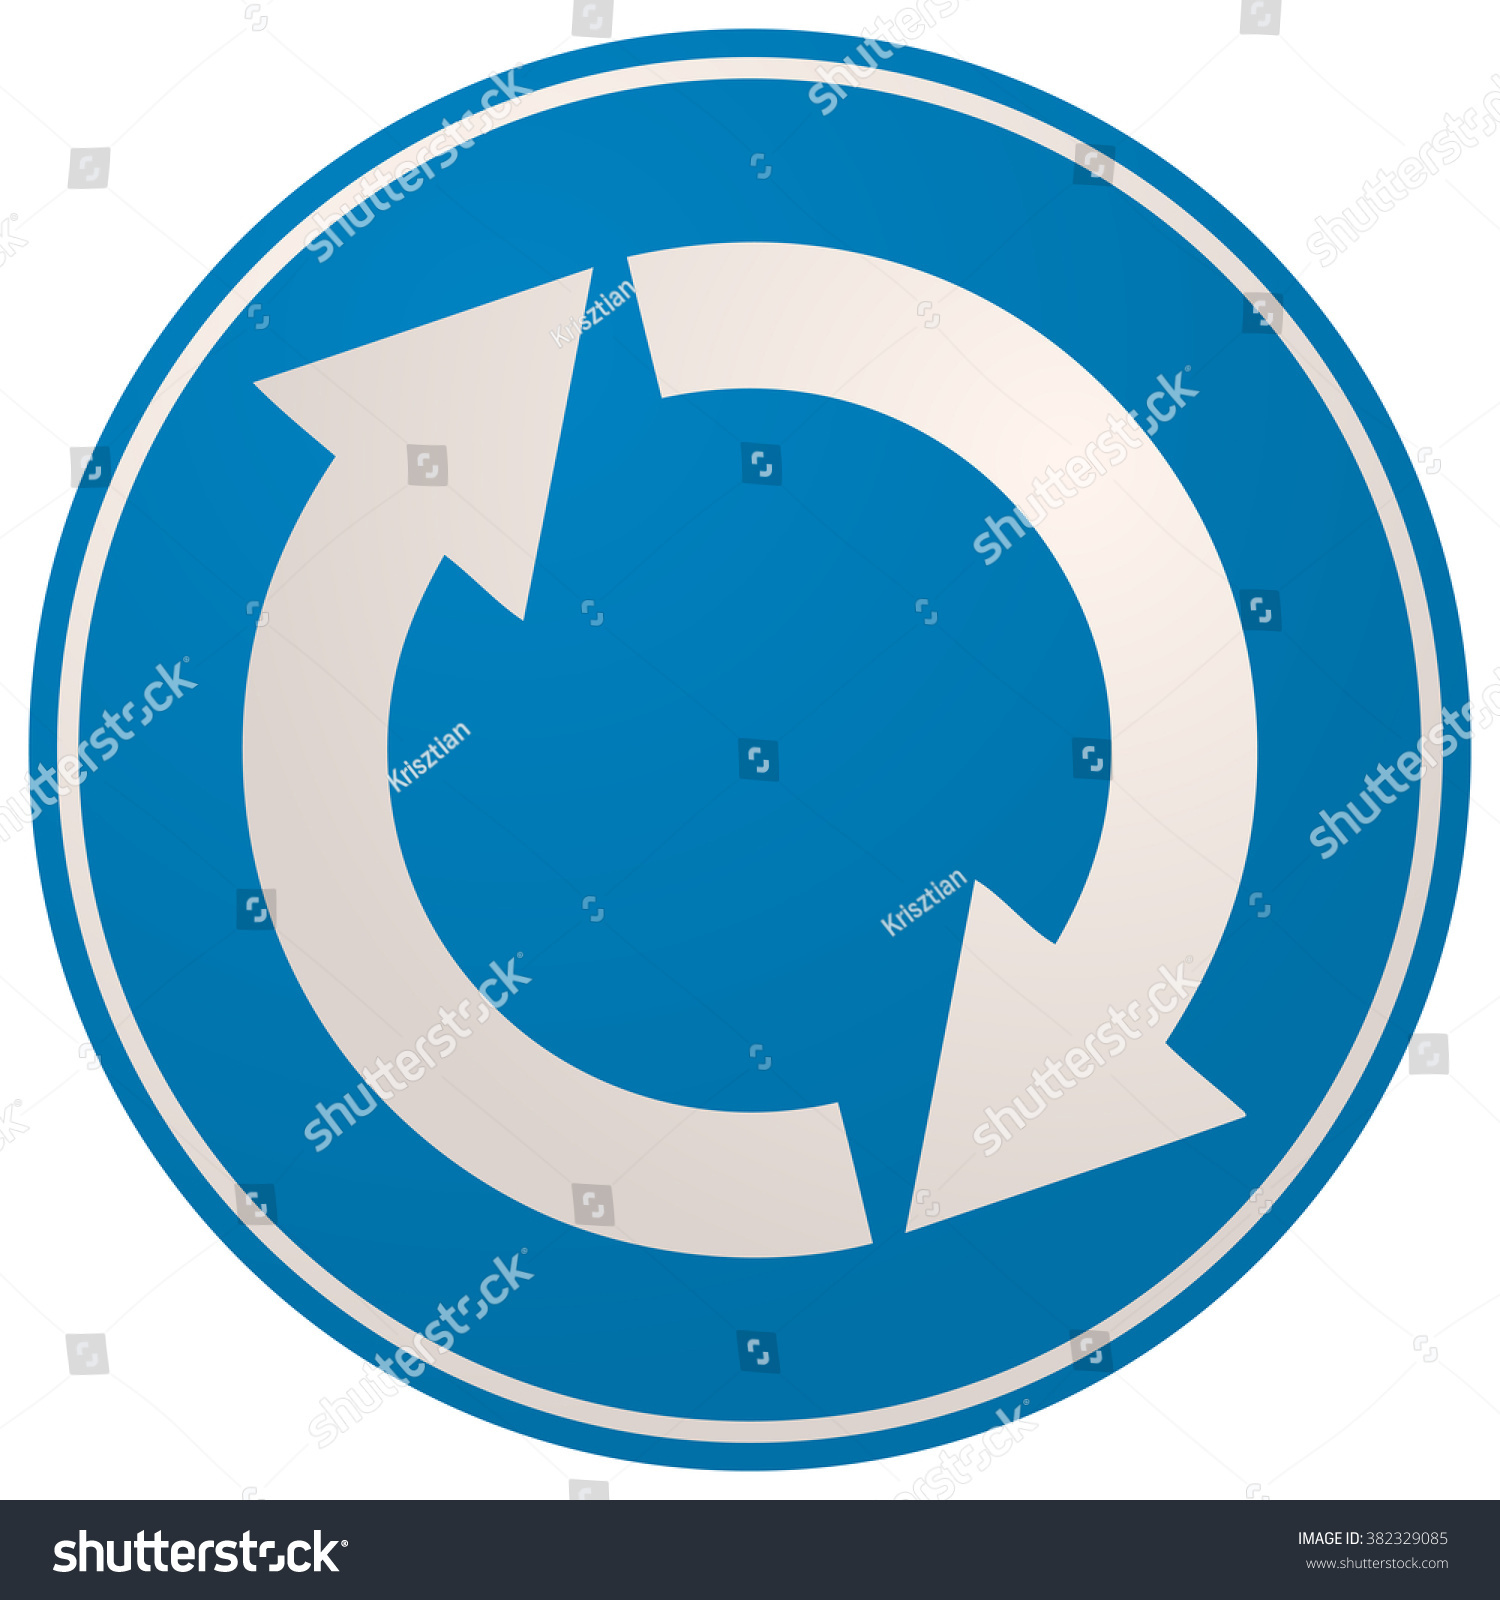 stock-vector-white-circle-arrows-on-a-blue-round-sign-vector-illustration-382329085.jpg